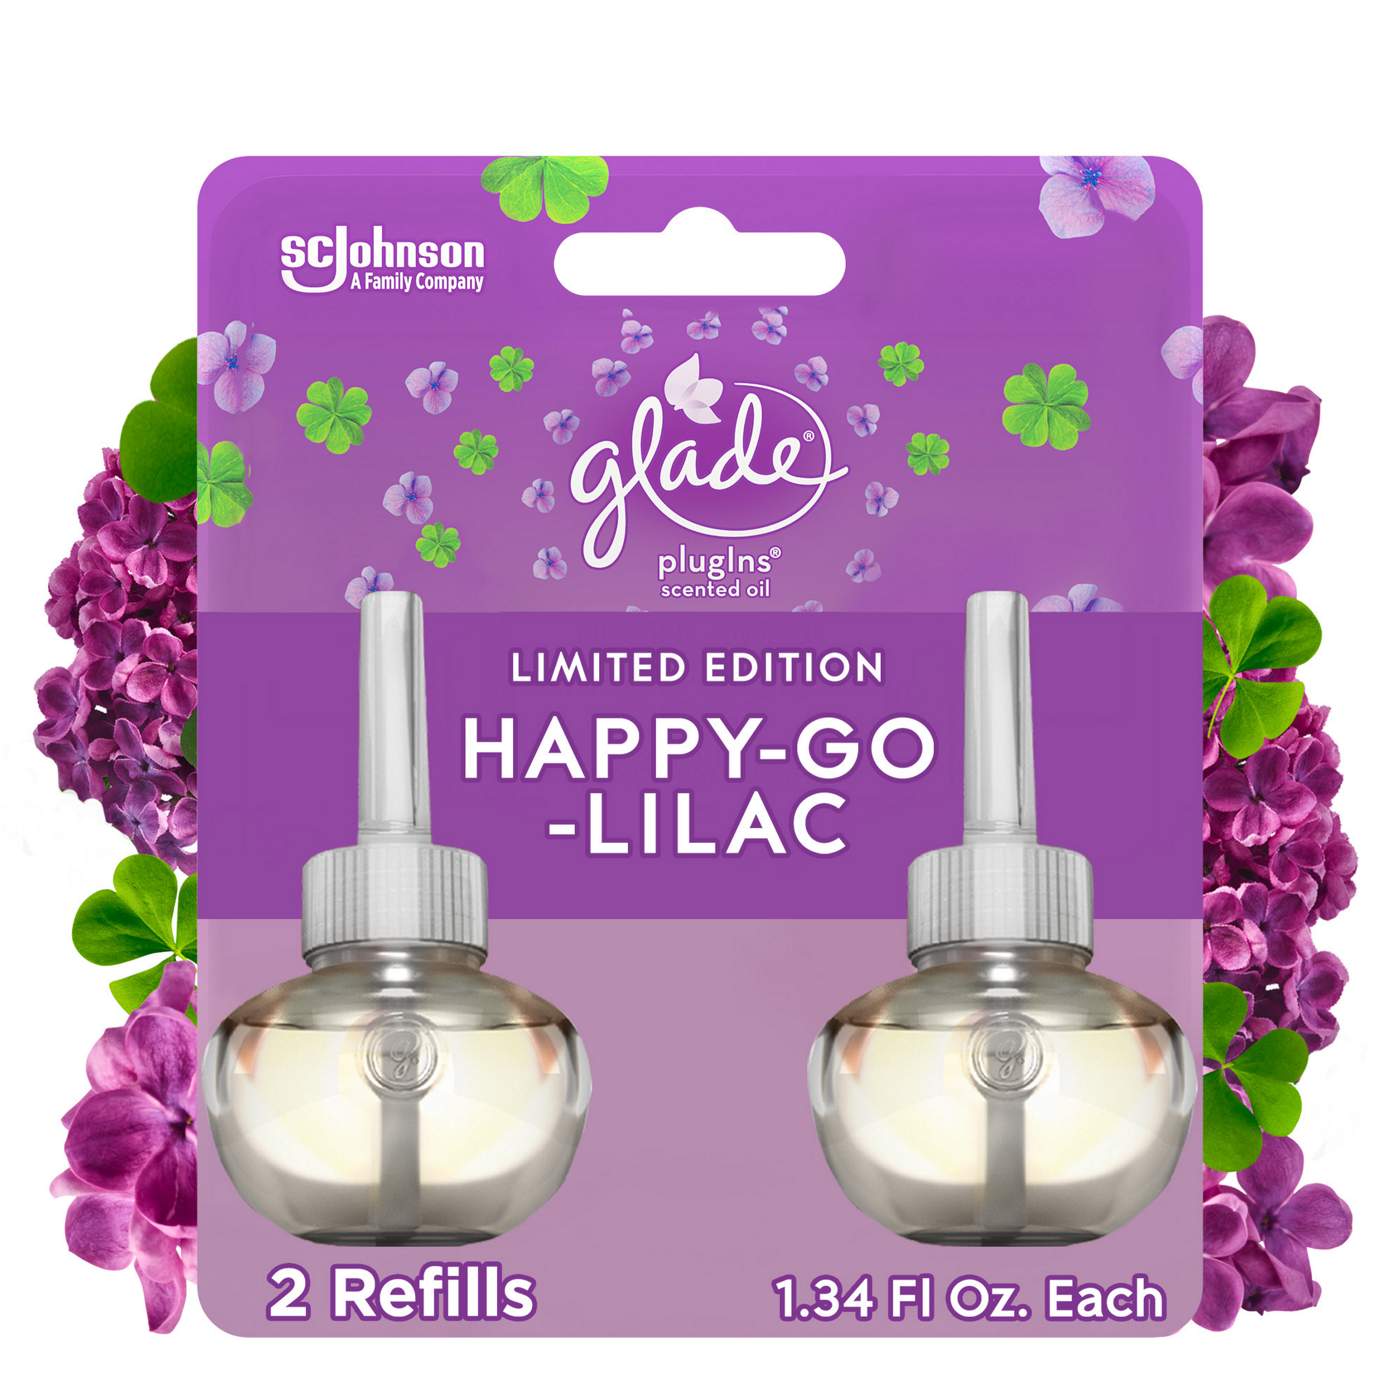 Glade PlugIns Scented Oil Air Freshener Refills - Happy Go Lilac; image 1 of 2